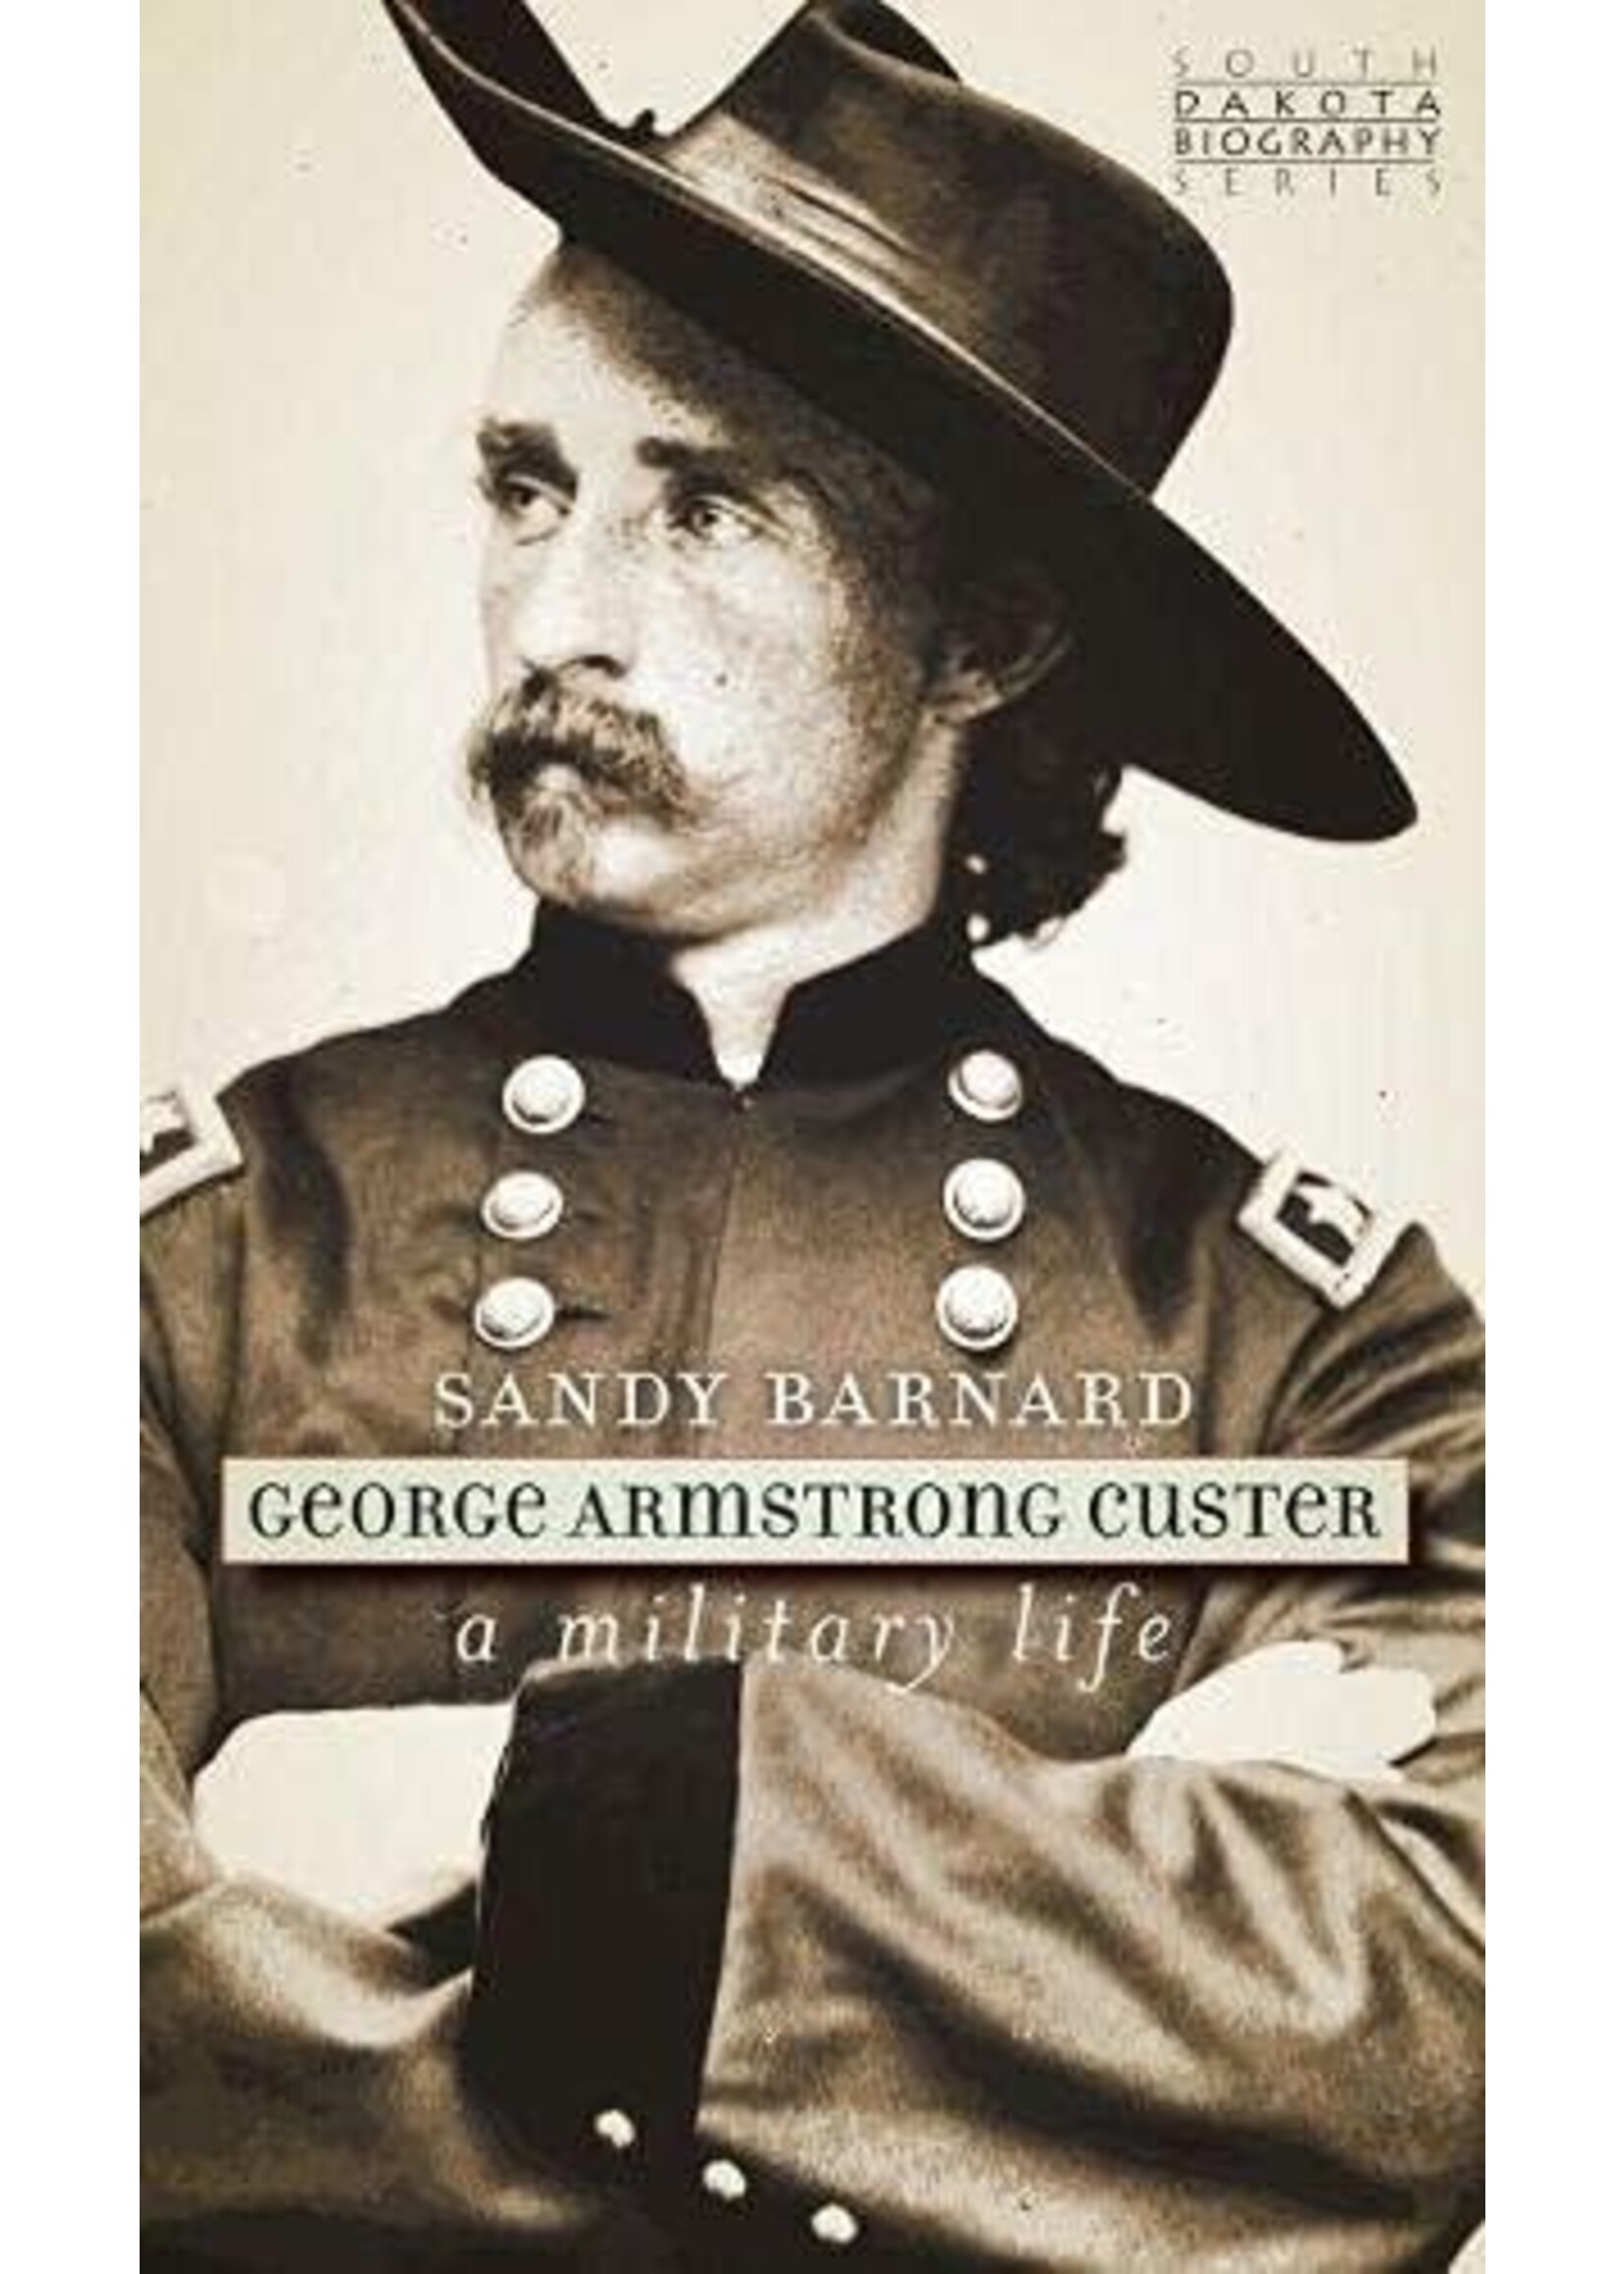 George Armstrong Custer: A Military Life